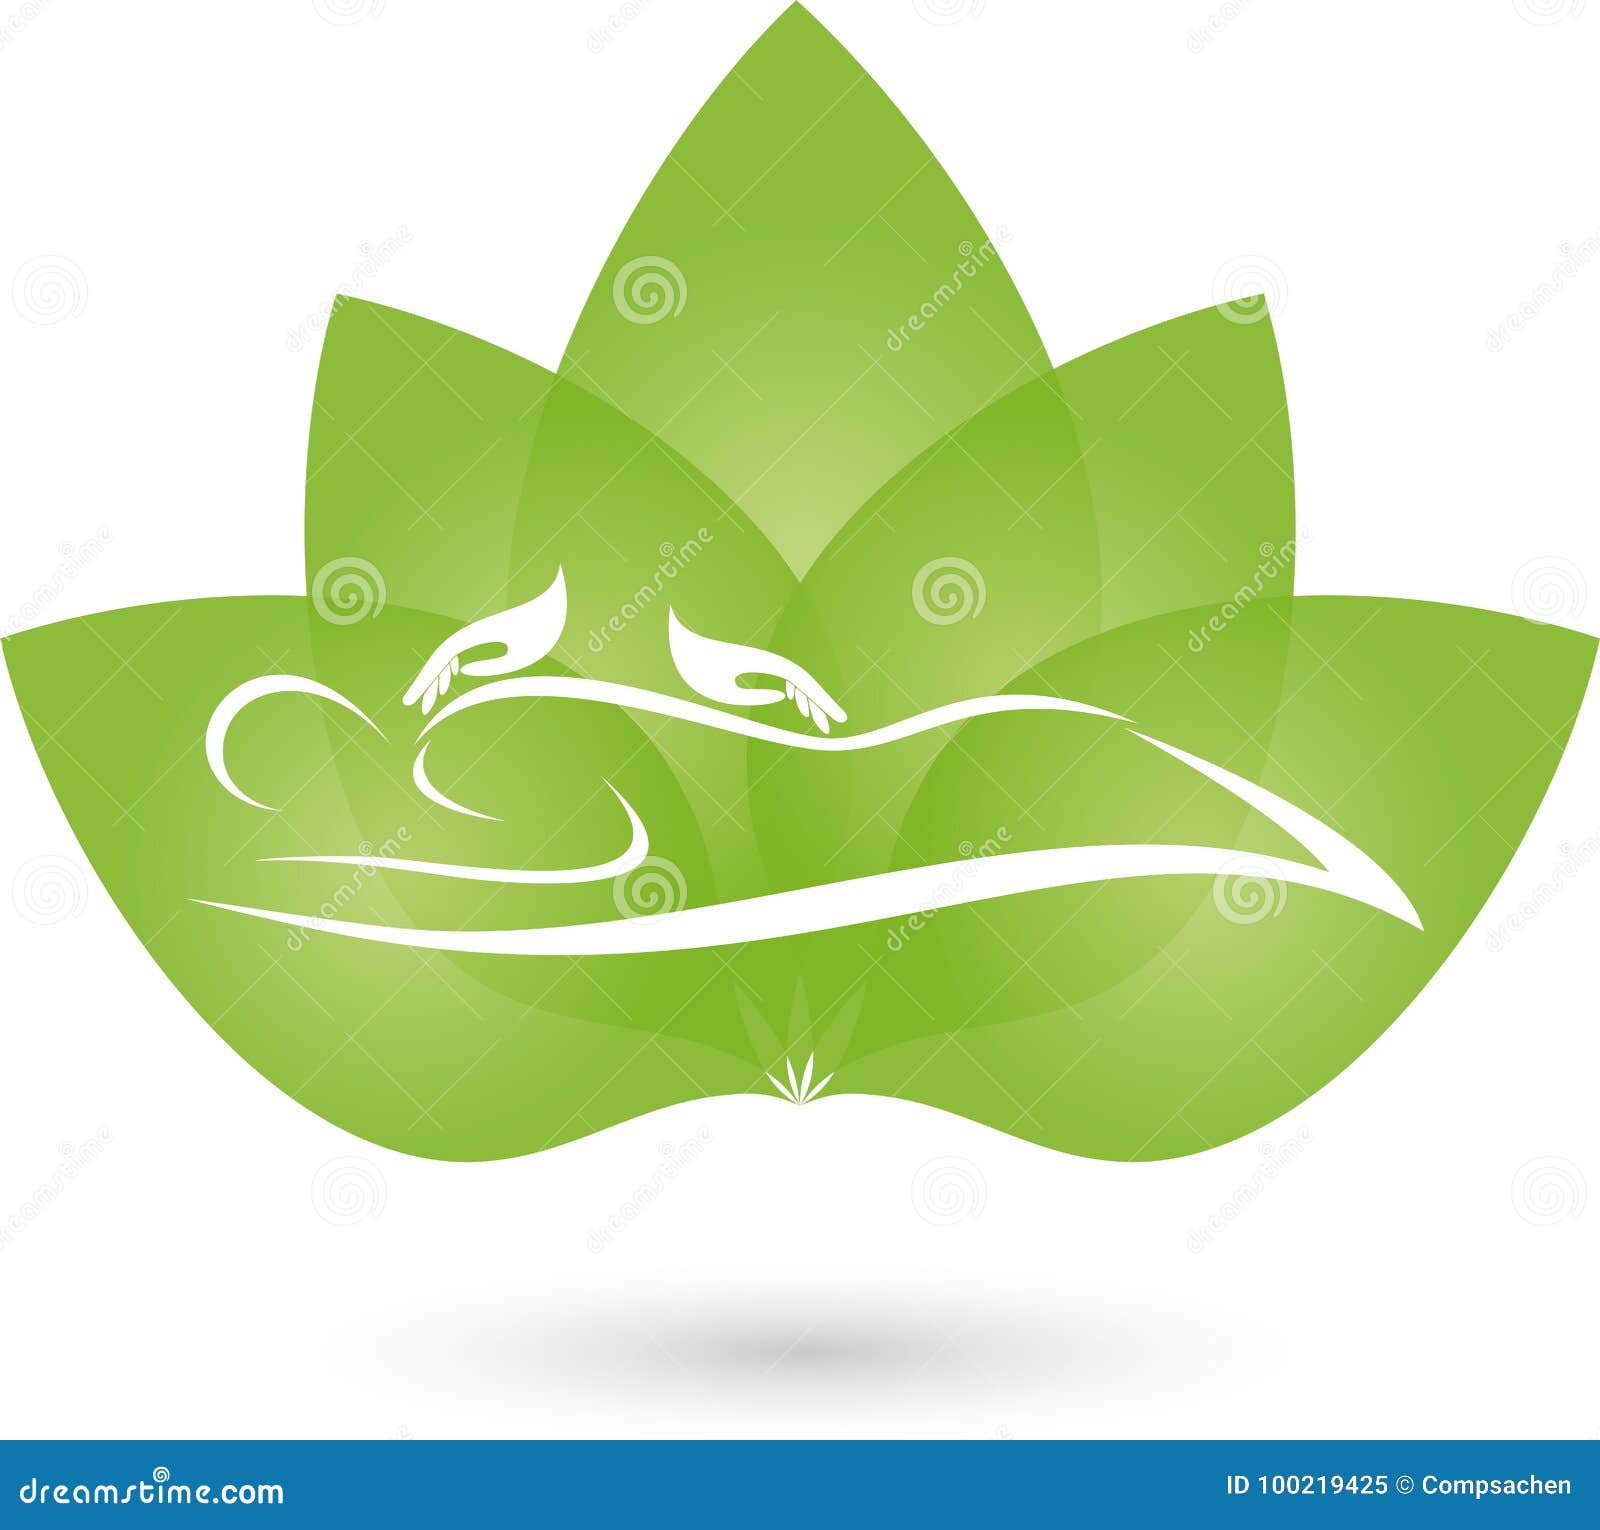 a person and two hands, massage and naturopathic logo